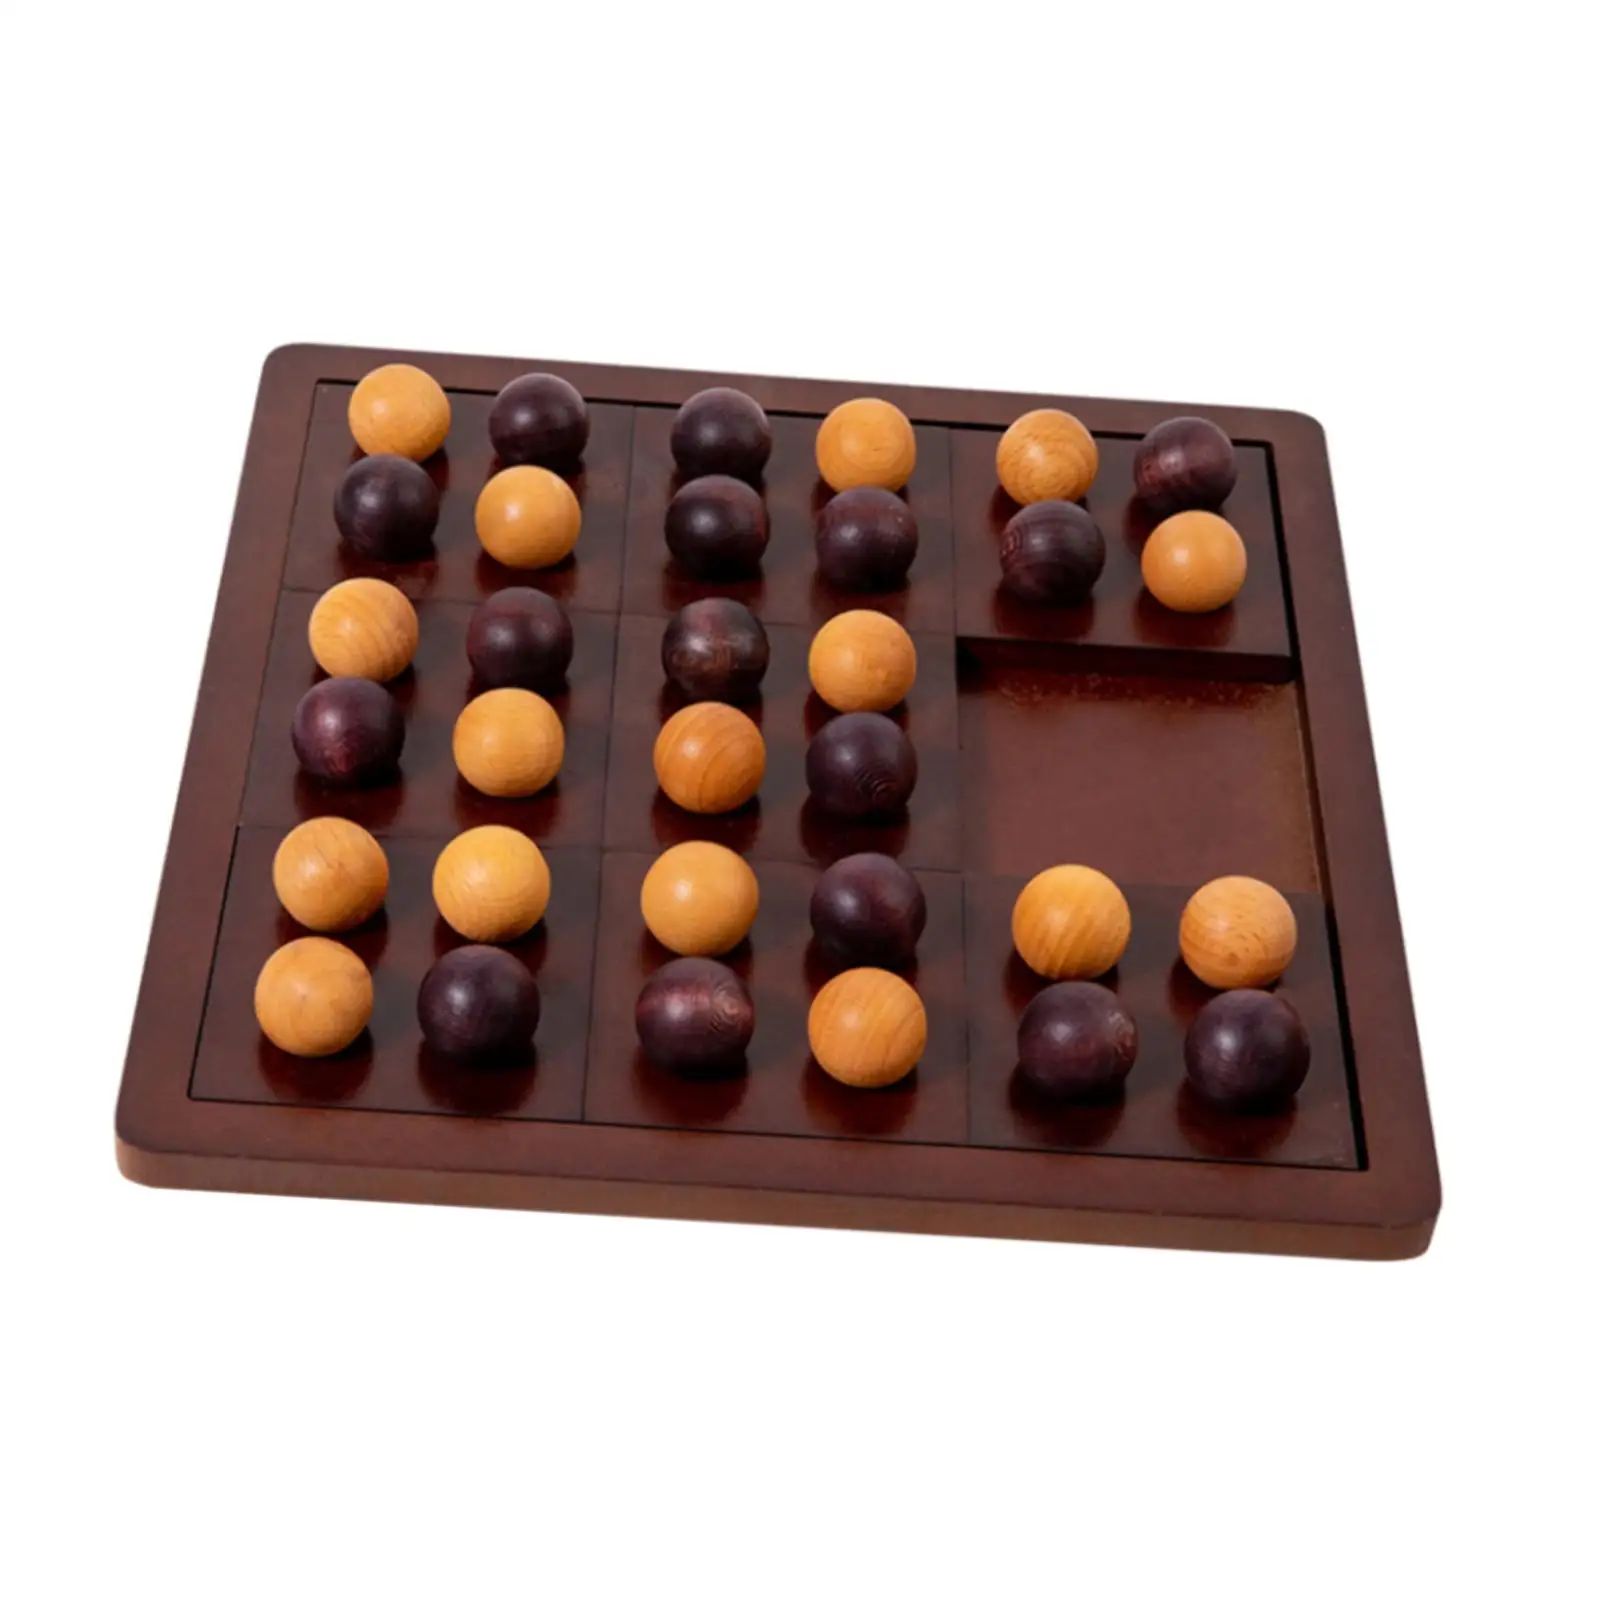 Tic TAC Toe Game Dual Challenge Hand Crafted Interactive Chess Toy for Adults Children Families Outdoor Indoor Entertainment